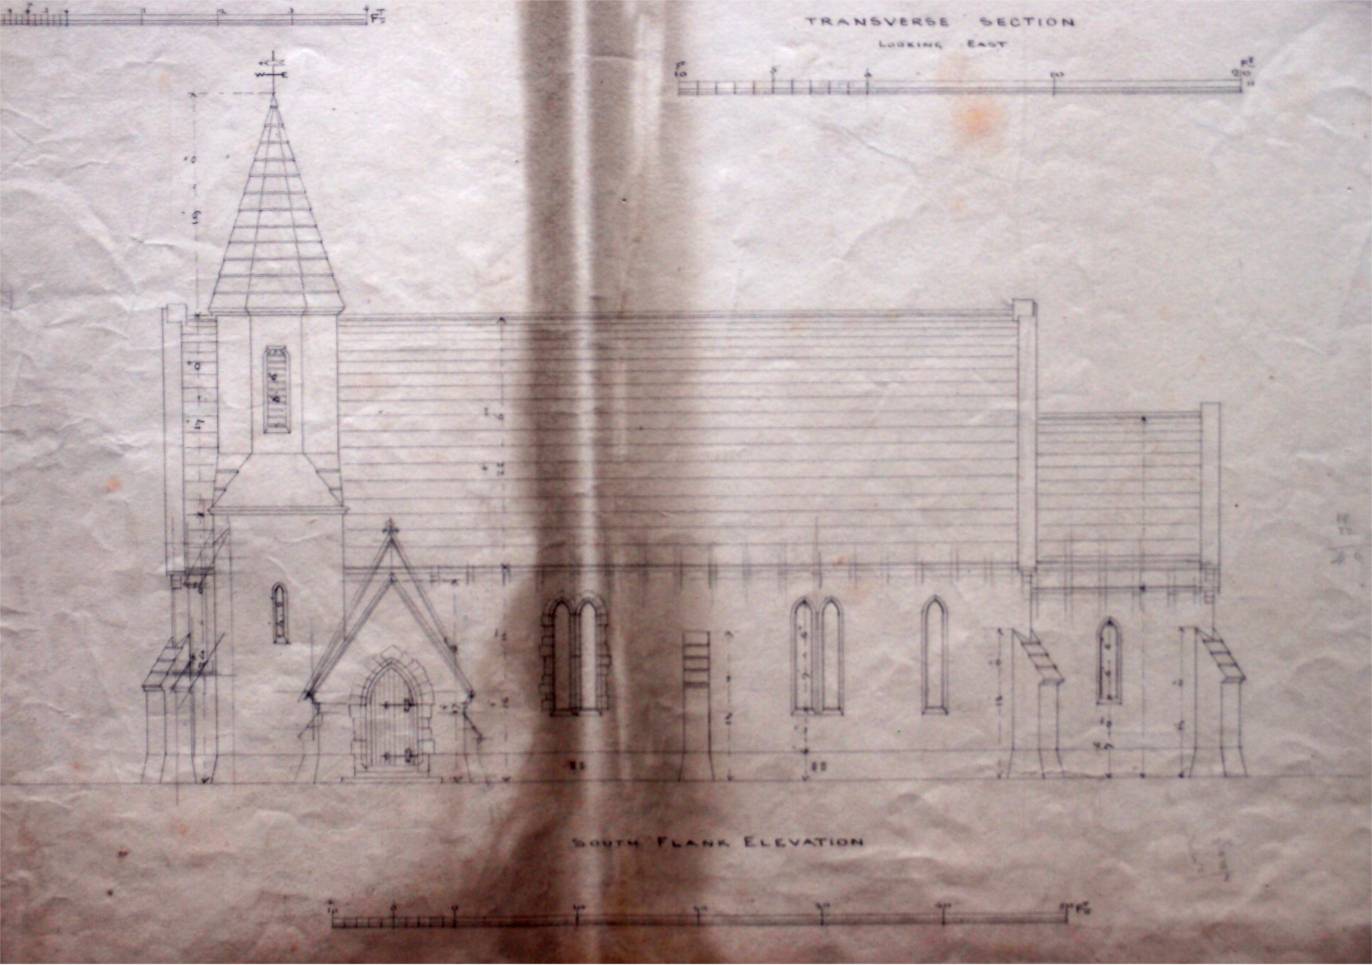 Bishop Plunkett built a new parish church at Tourmakeady for the parish of Ballyvoie, in addition to founding schools in the district.  Designed by Joseph Welland in 1851, it was erected on high ground on the edge of Drimbawn demesne overlooking the village, RCB Library PF/26